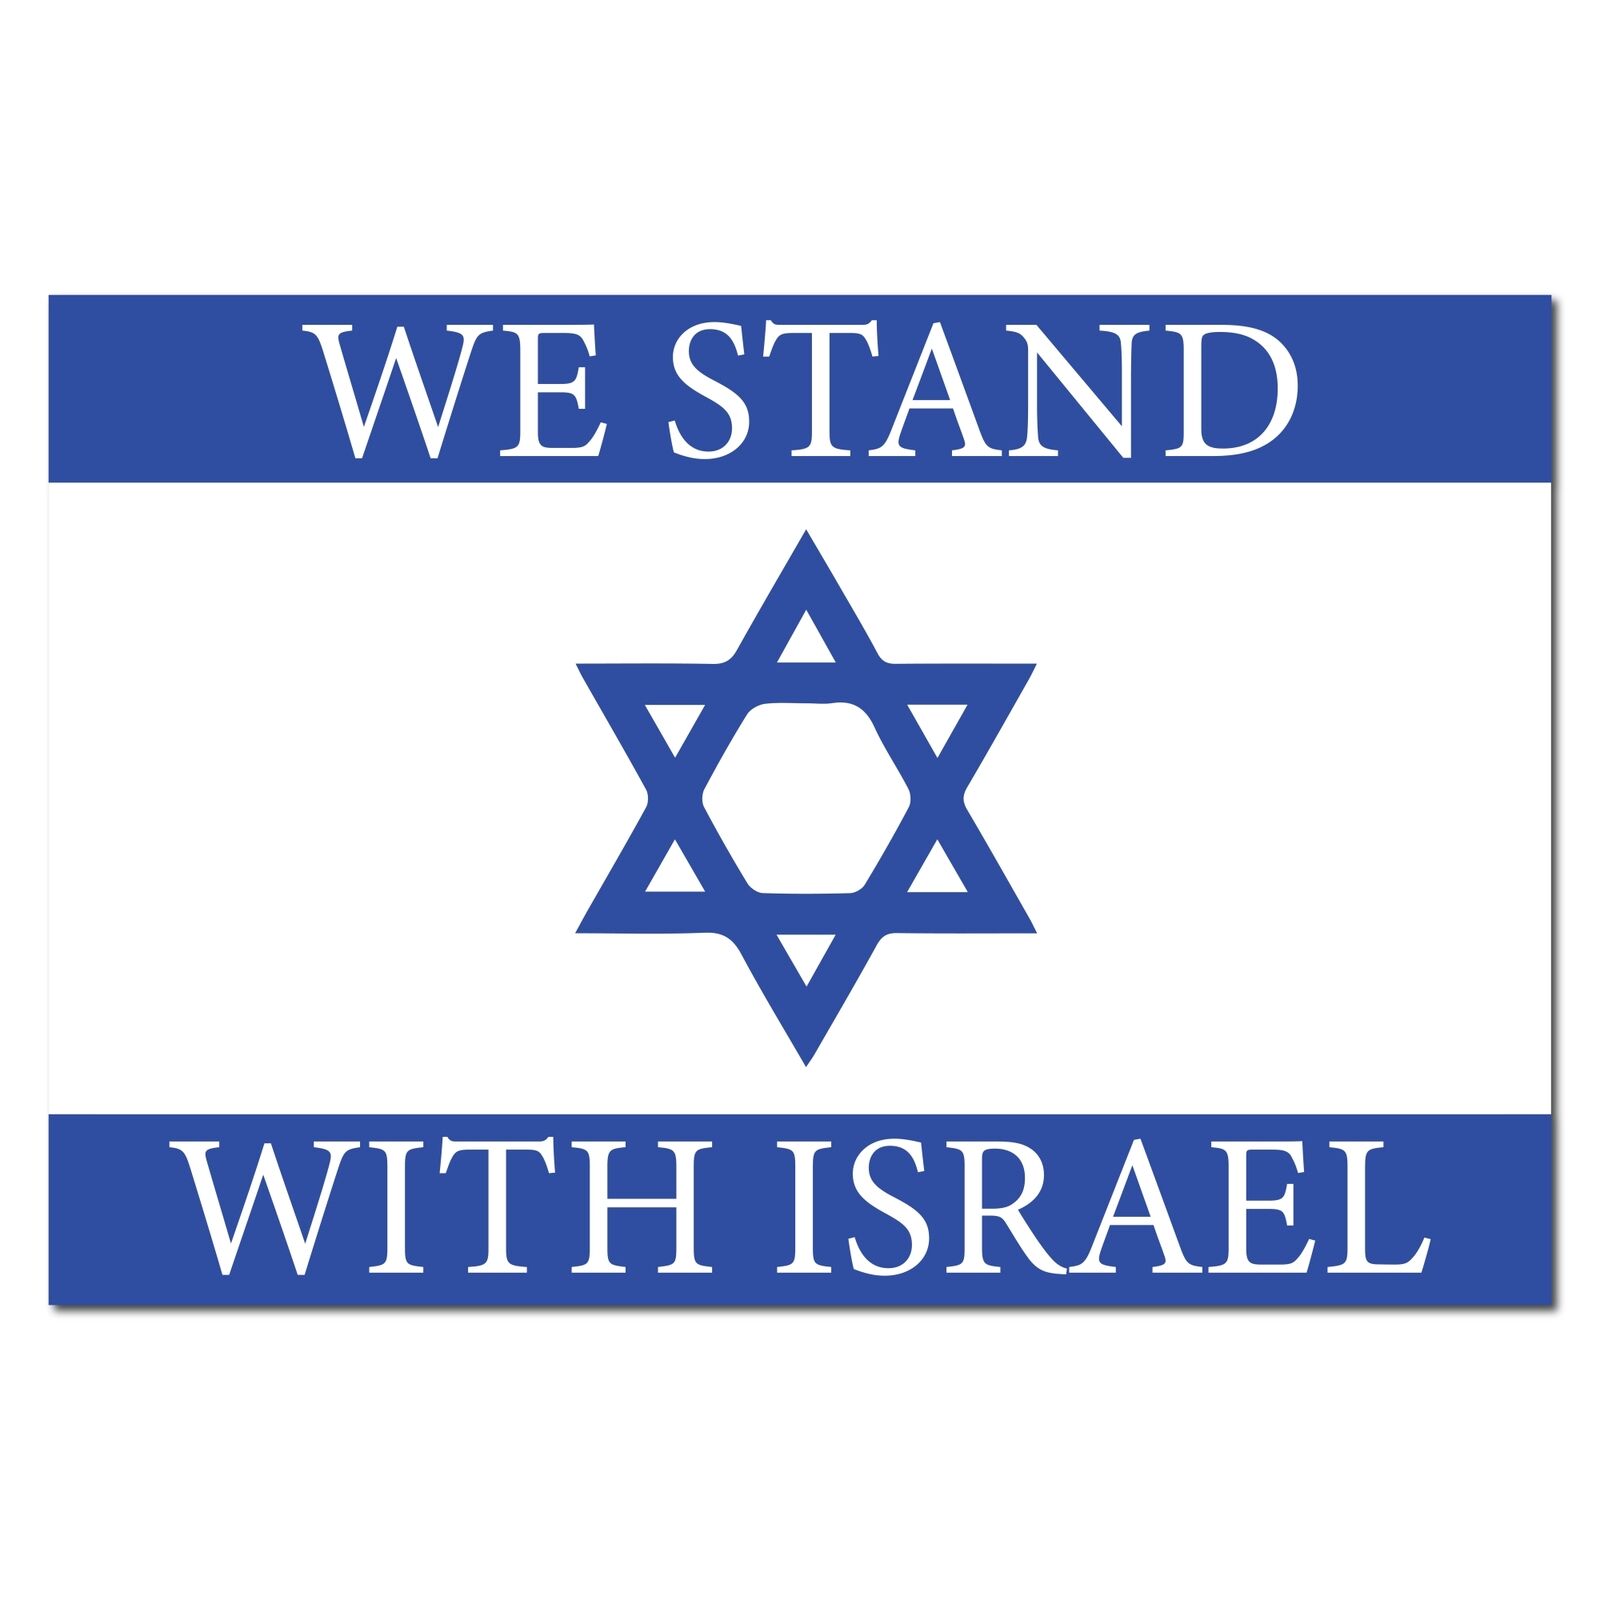 We Stand With Israel Israeli Flag Magnet Decal, 4x6 Inches, Automotive Mganet